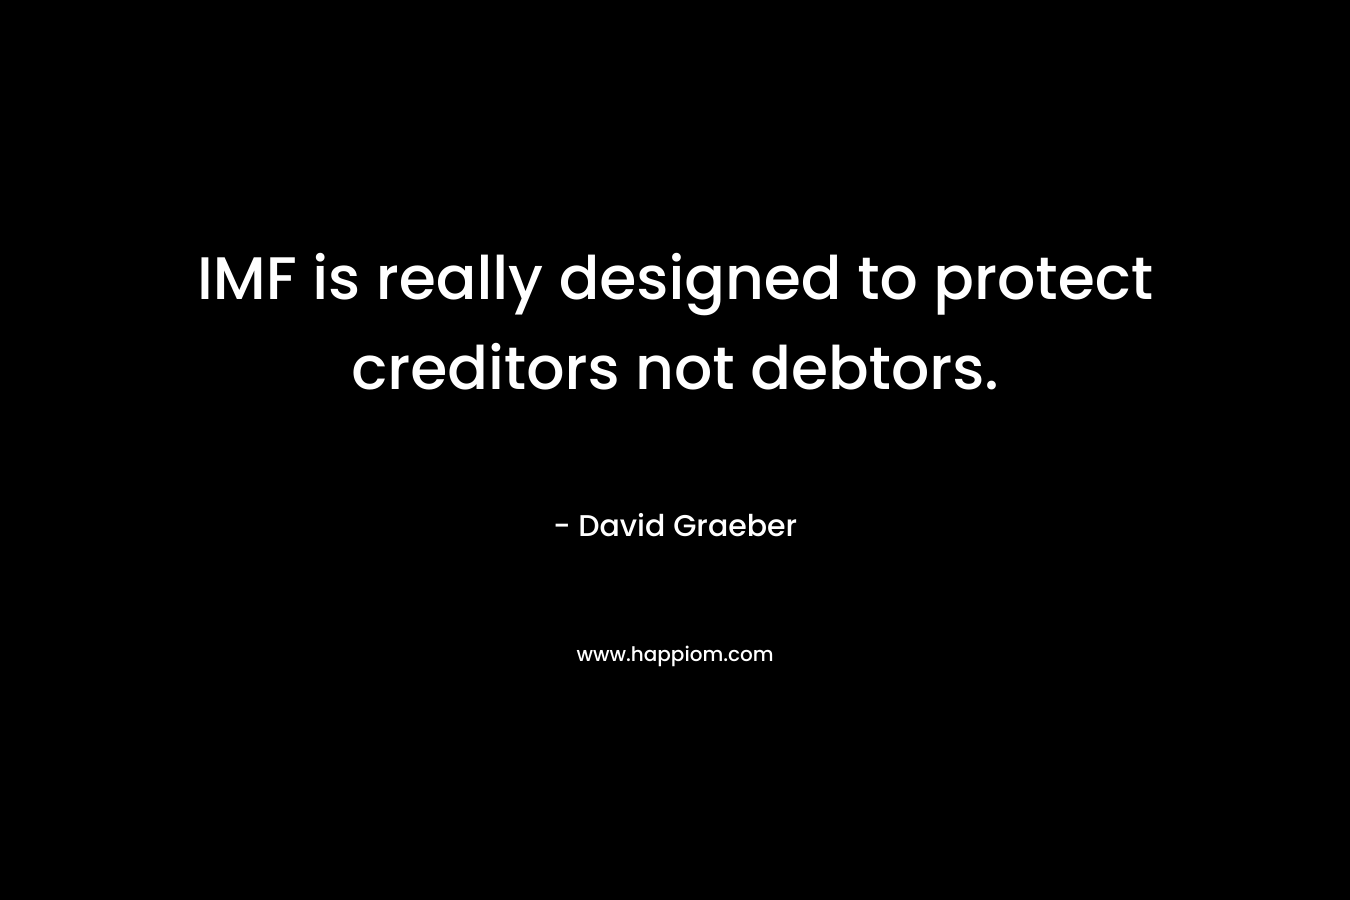 IMF is really designed to protect creditors not debtors.